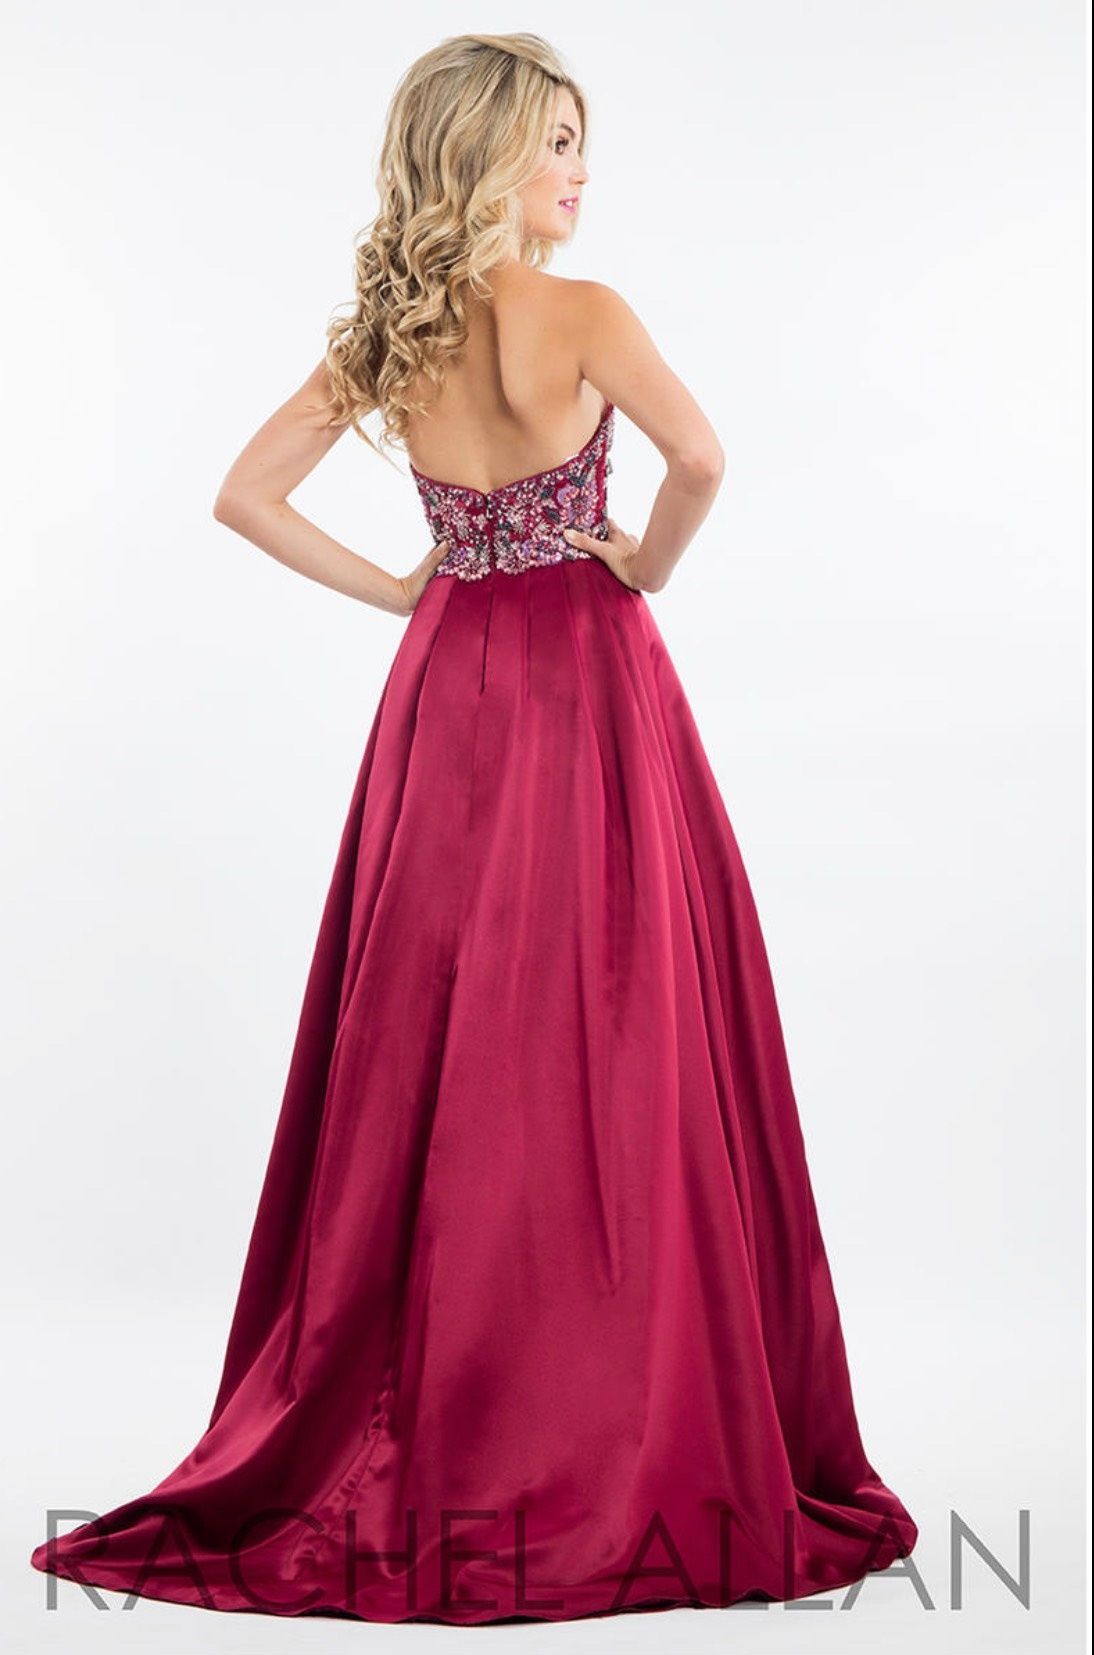 Style 7508 Rachel Allan Size 6 Prom Strapless Red Ball Gown on Queenly